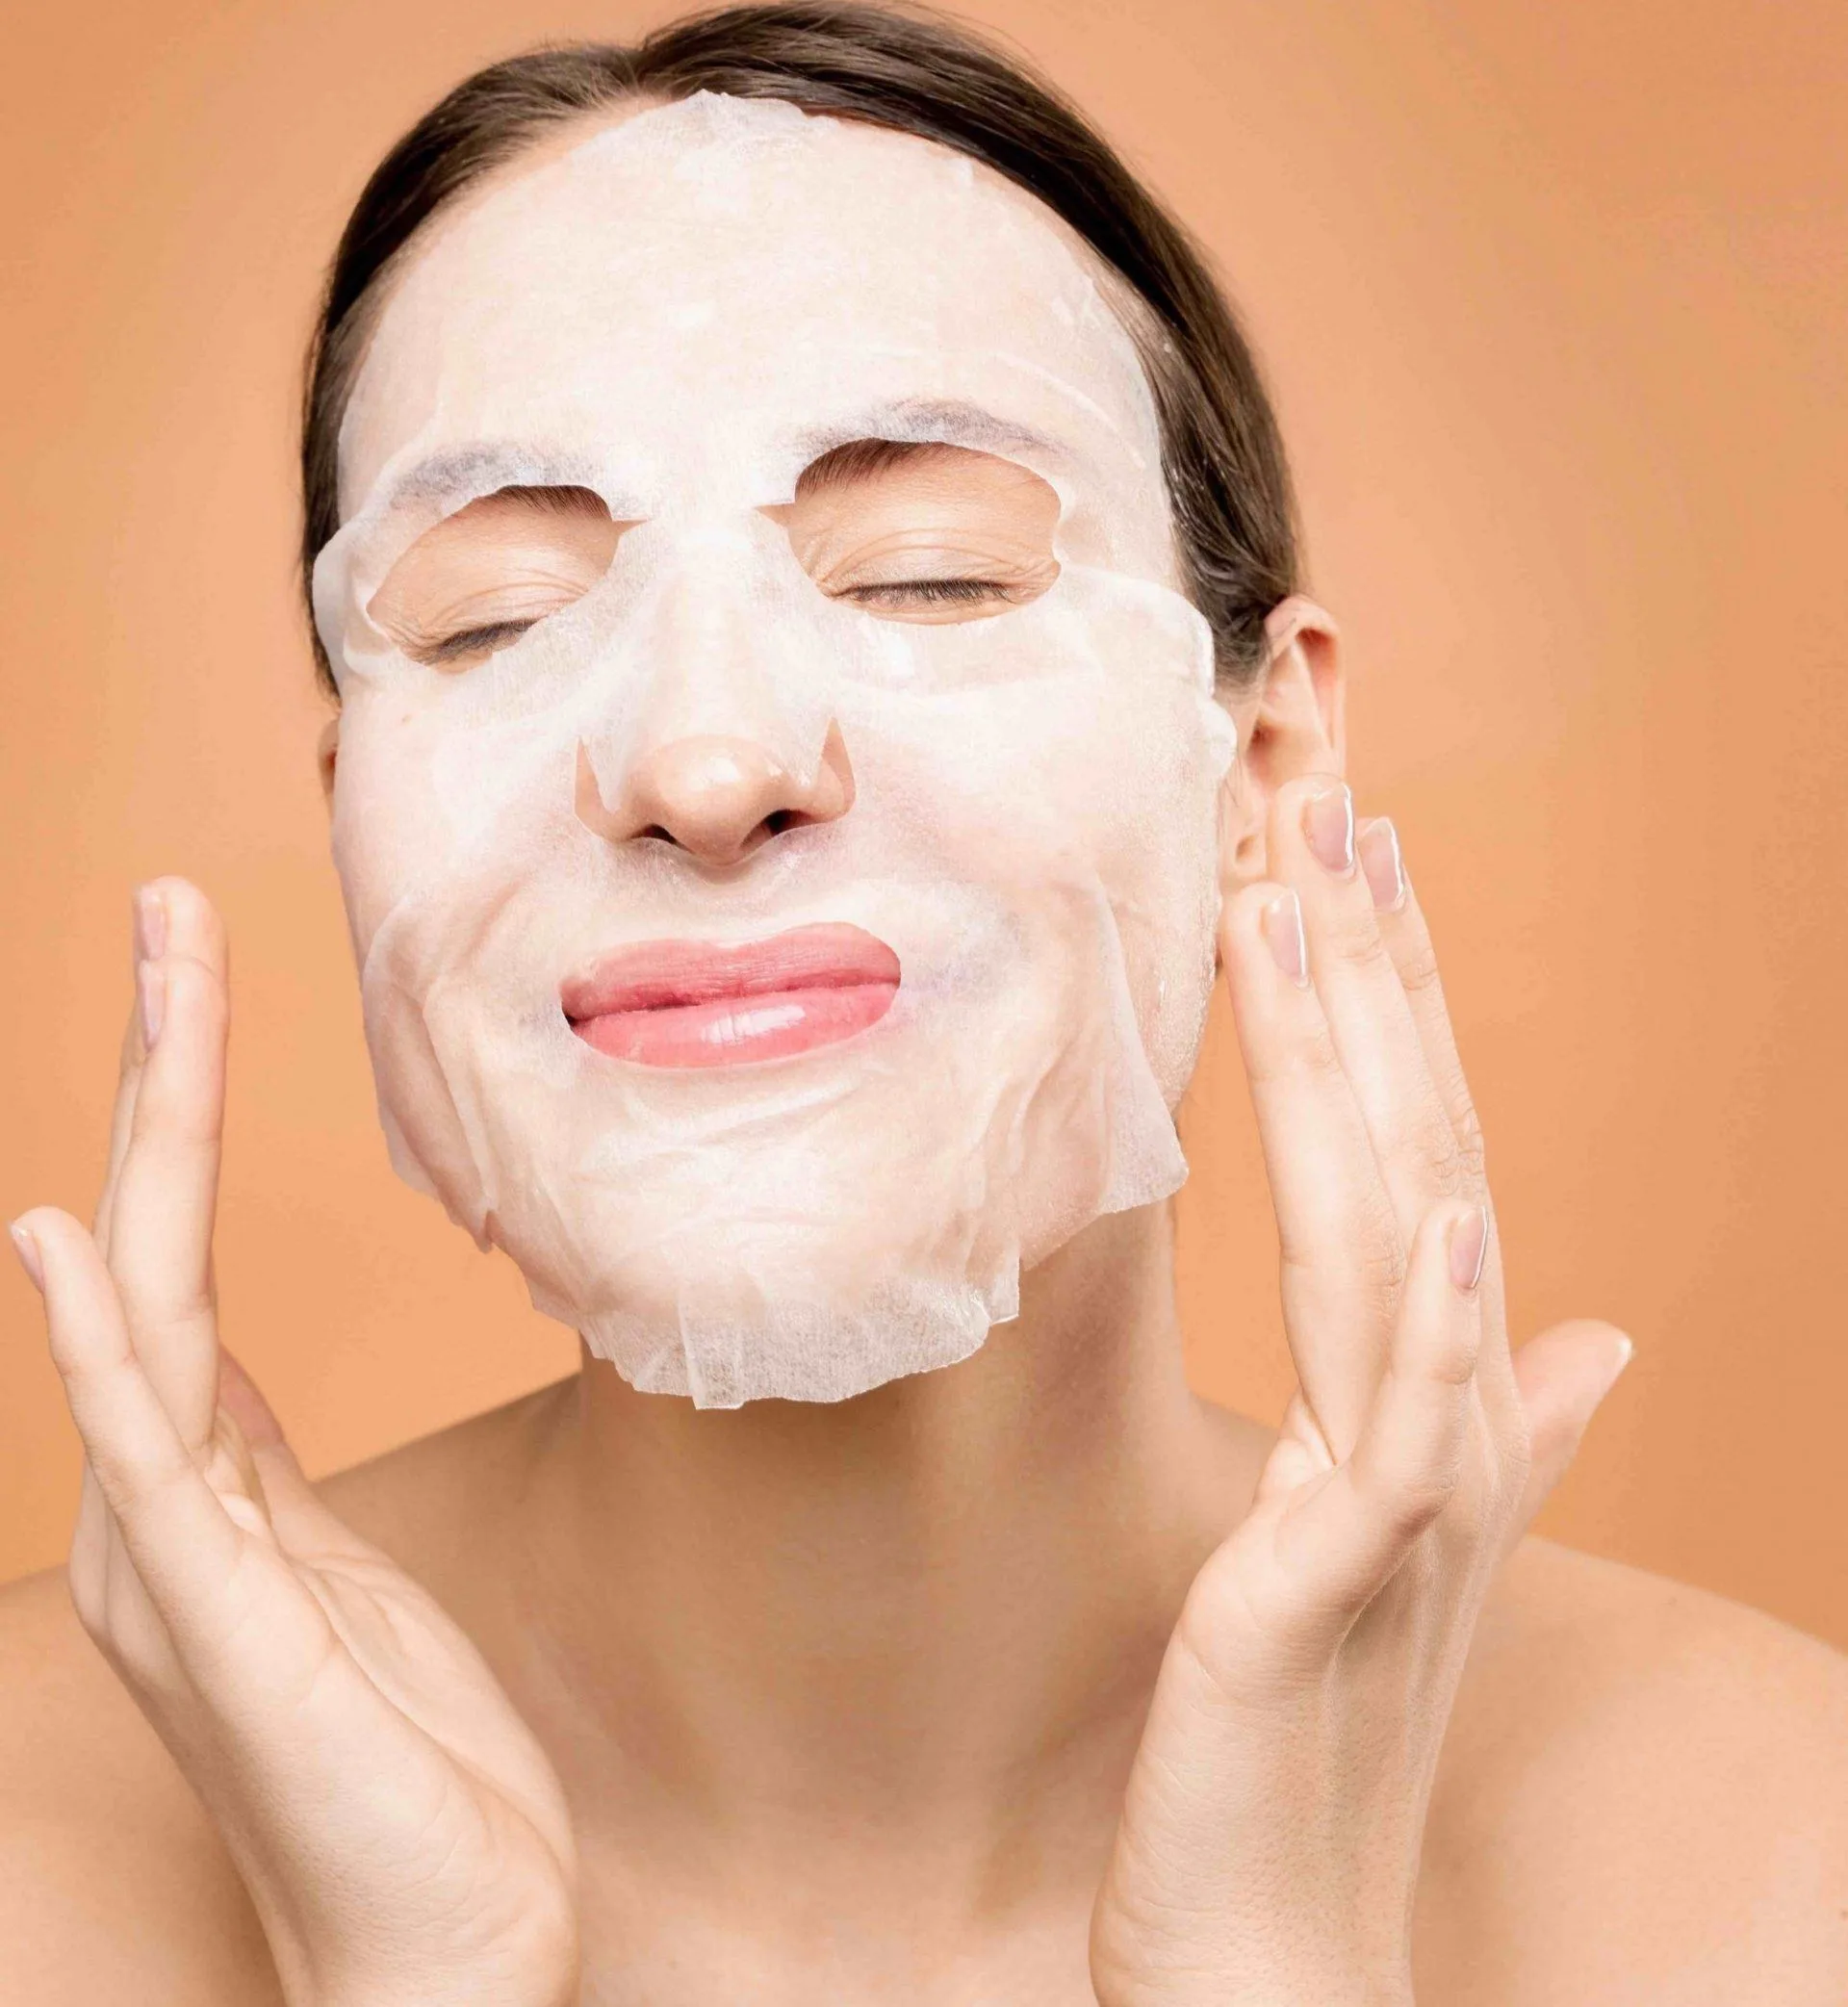 Skin Care or Professional Treatments…Find What Works For You